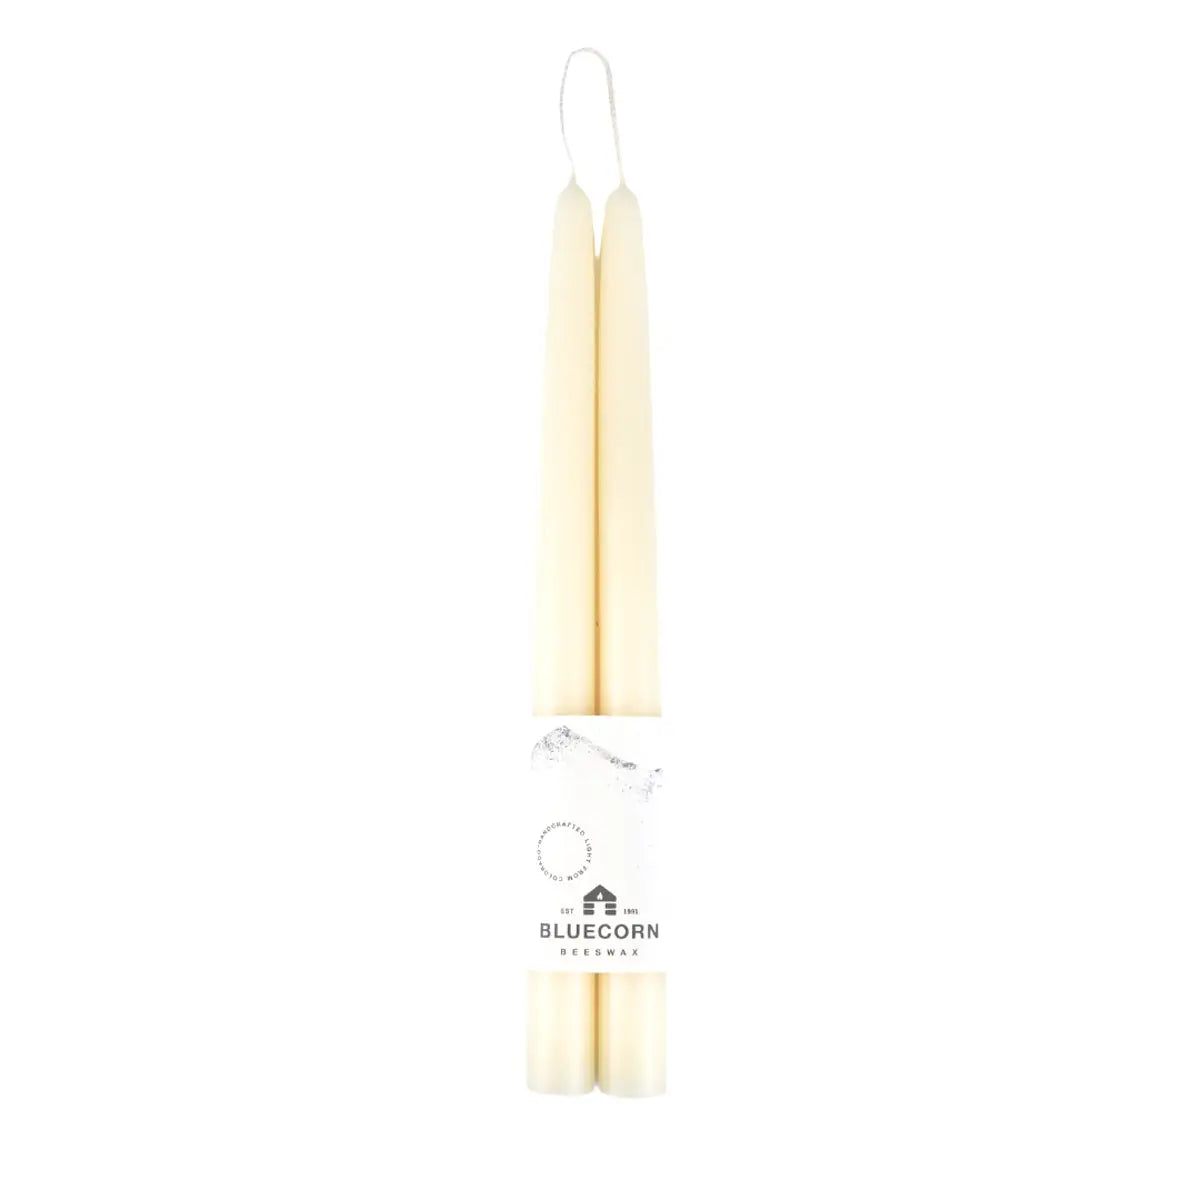 Beeswax Candle, Taper Pair